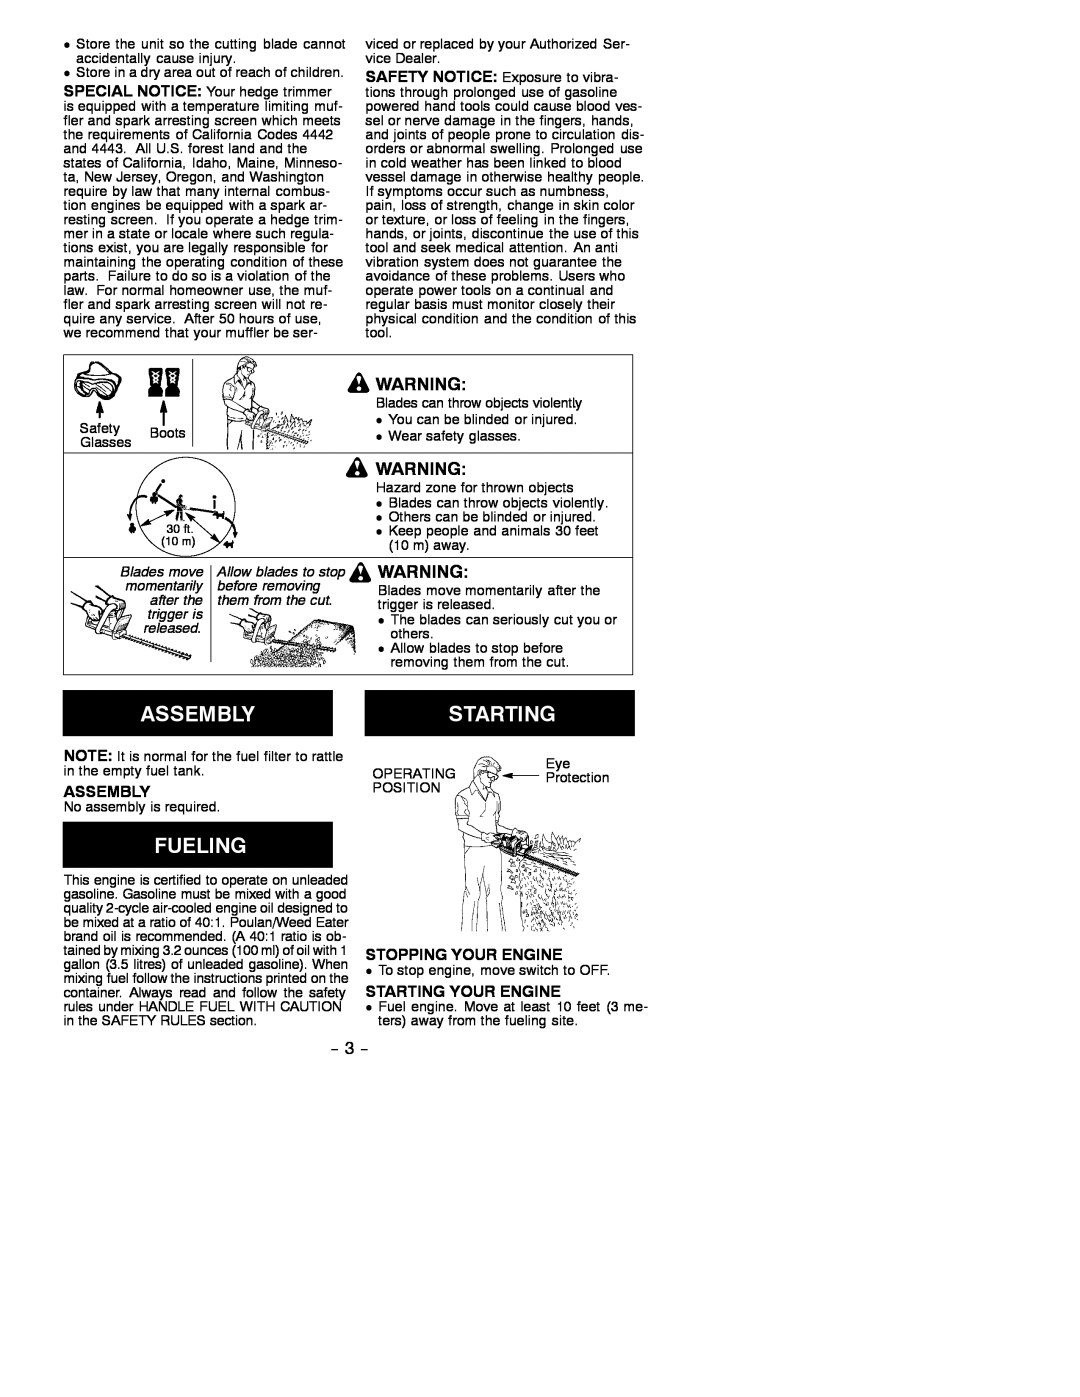 Weed Eater 530087628 operating instructions Assembly, Stopping Your Engine, Starting Your Engine 